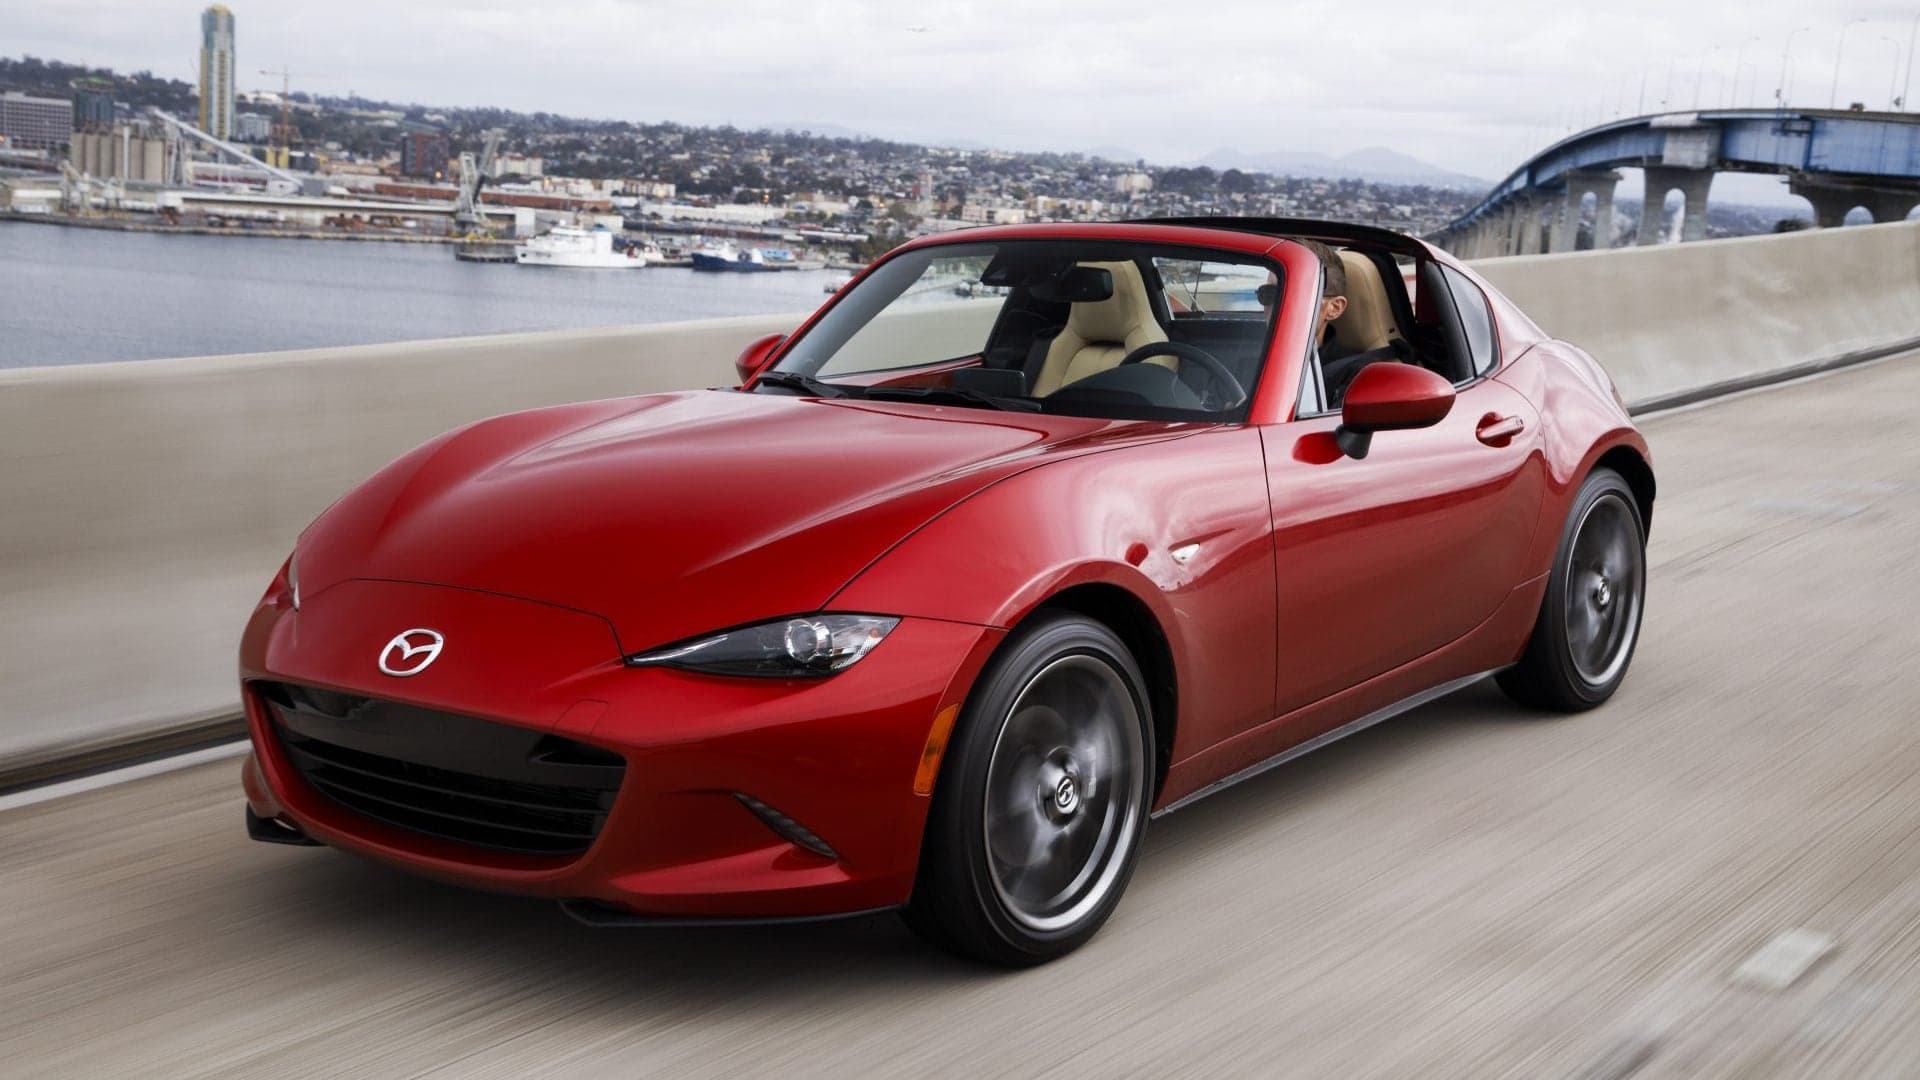 Mazda: All-Wheel-Drive Availability Crucial for Future Success, MX-5 to Remain RWD